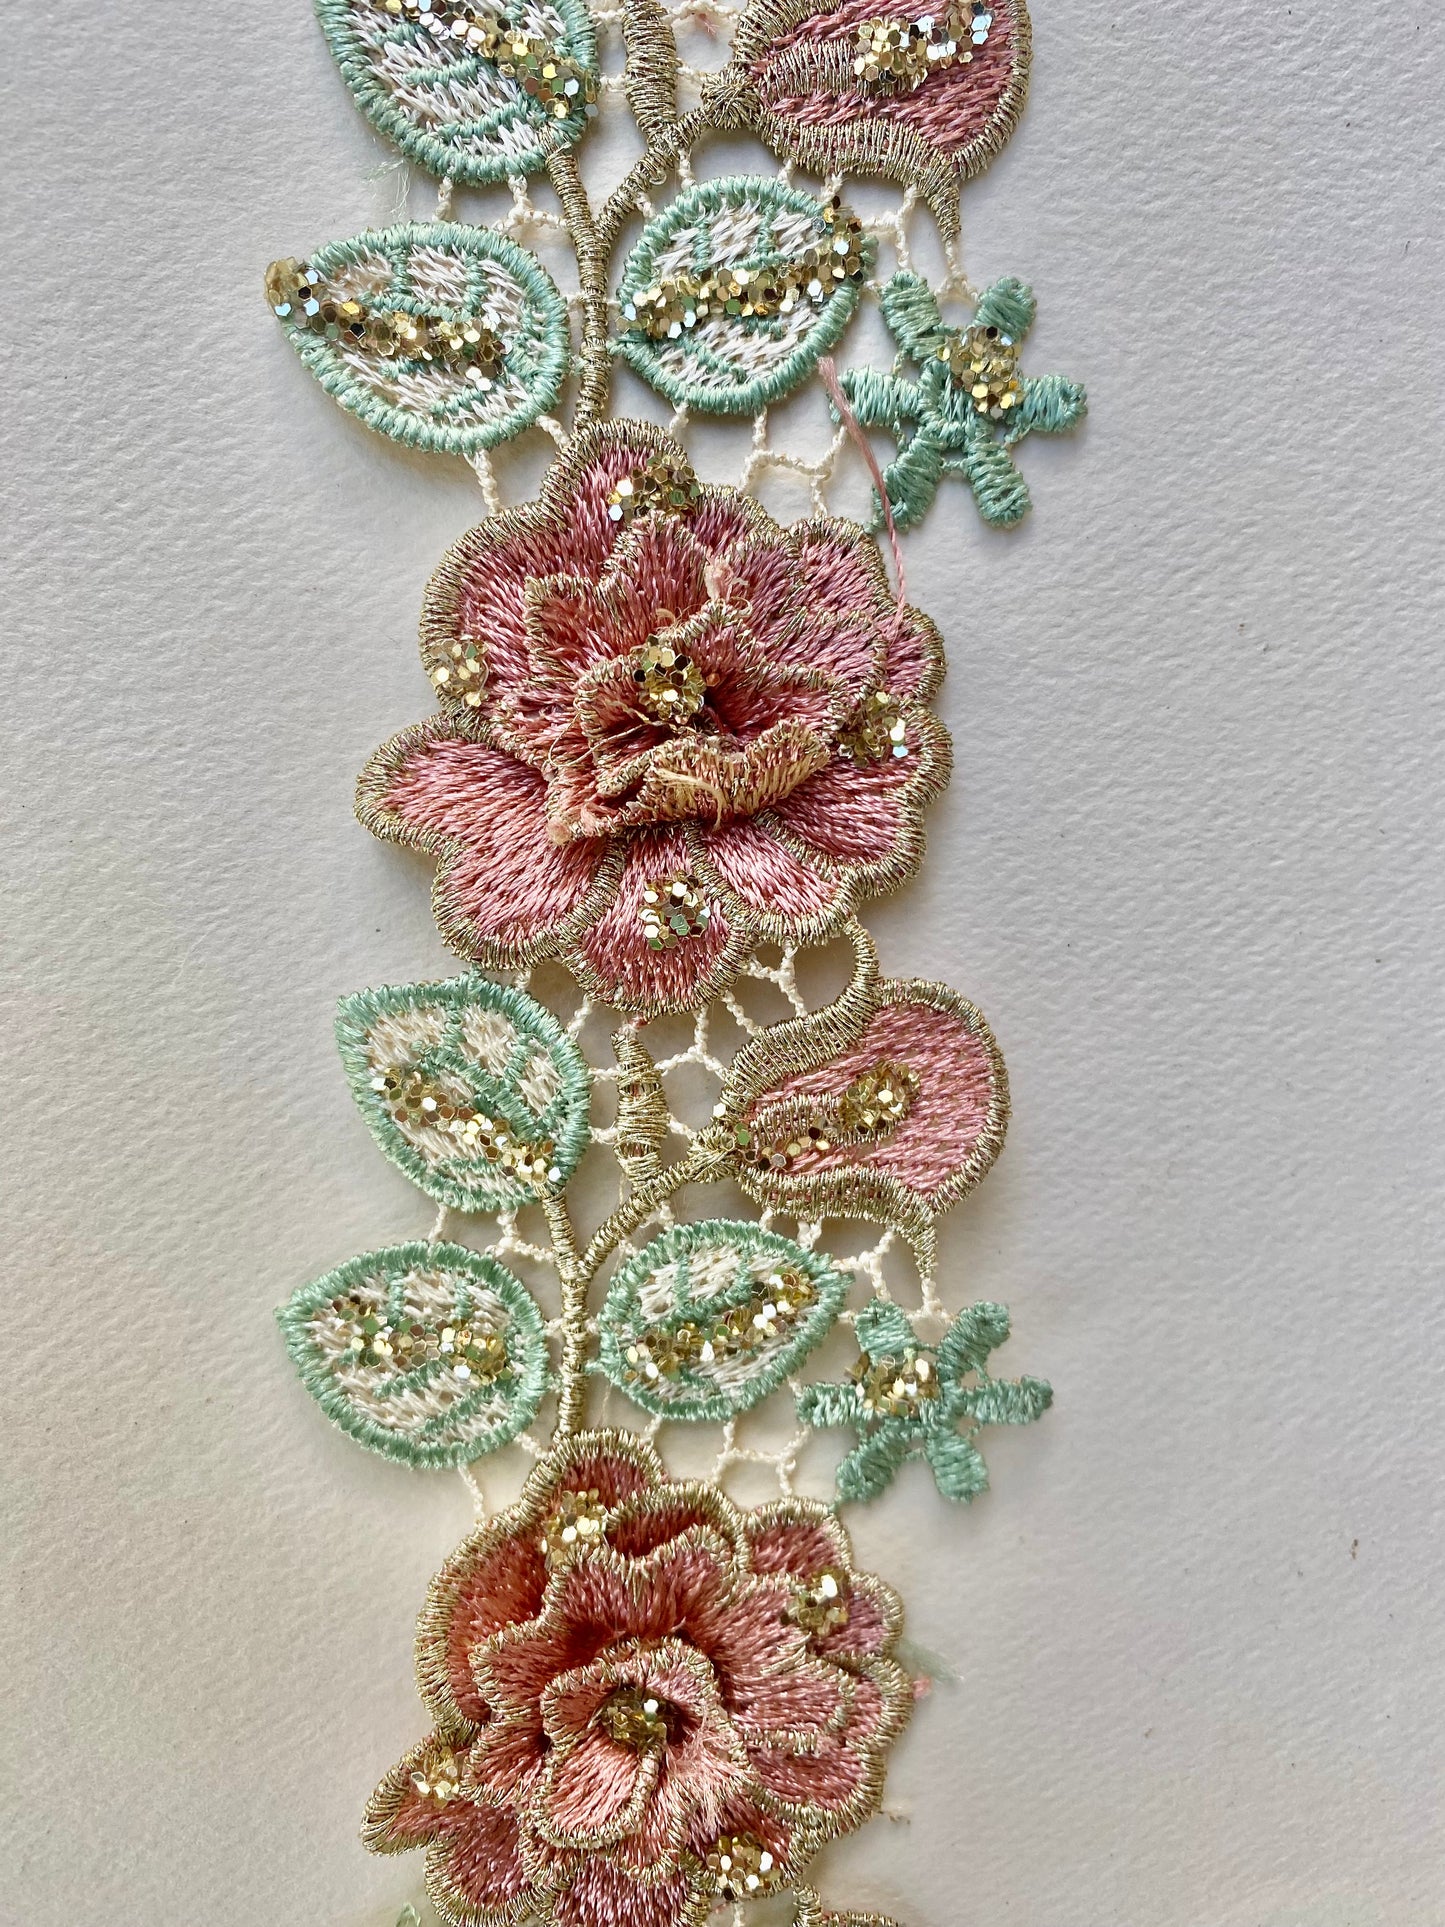 Rose and Leaf lace trim. Dusty Pink & Gold Thread